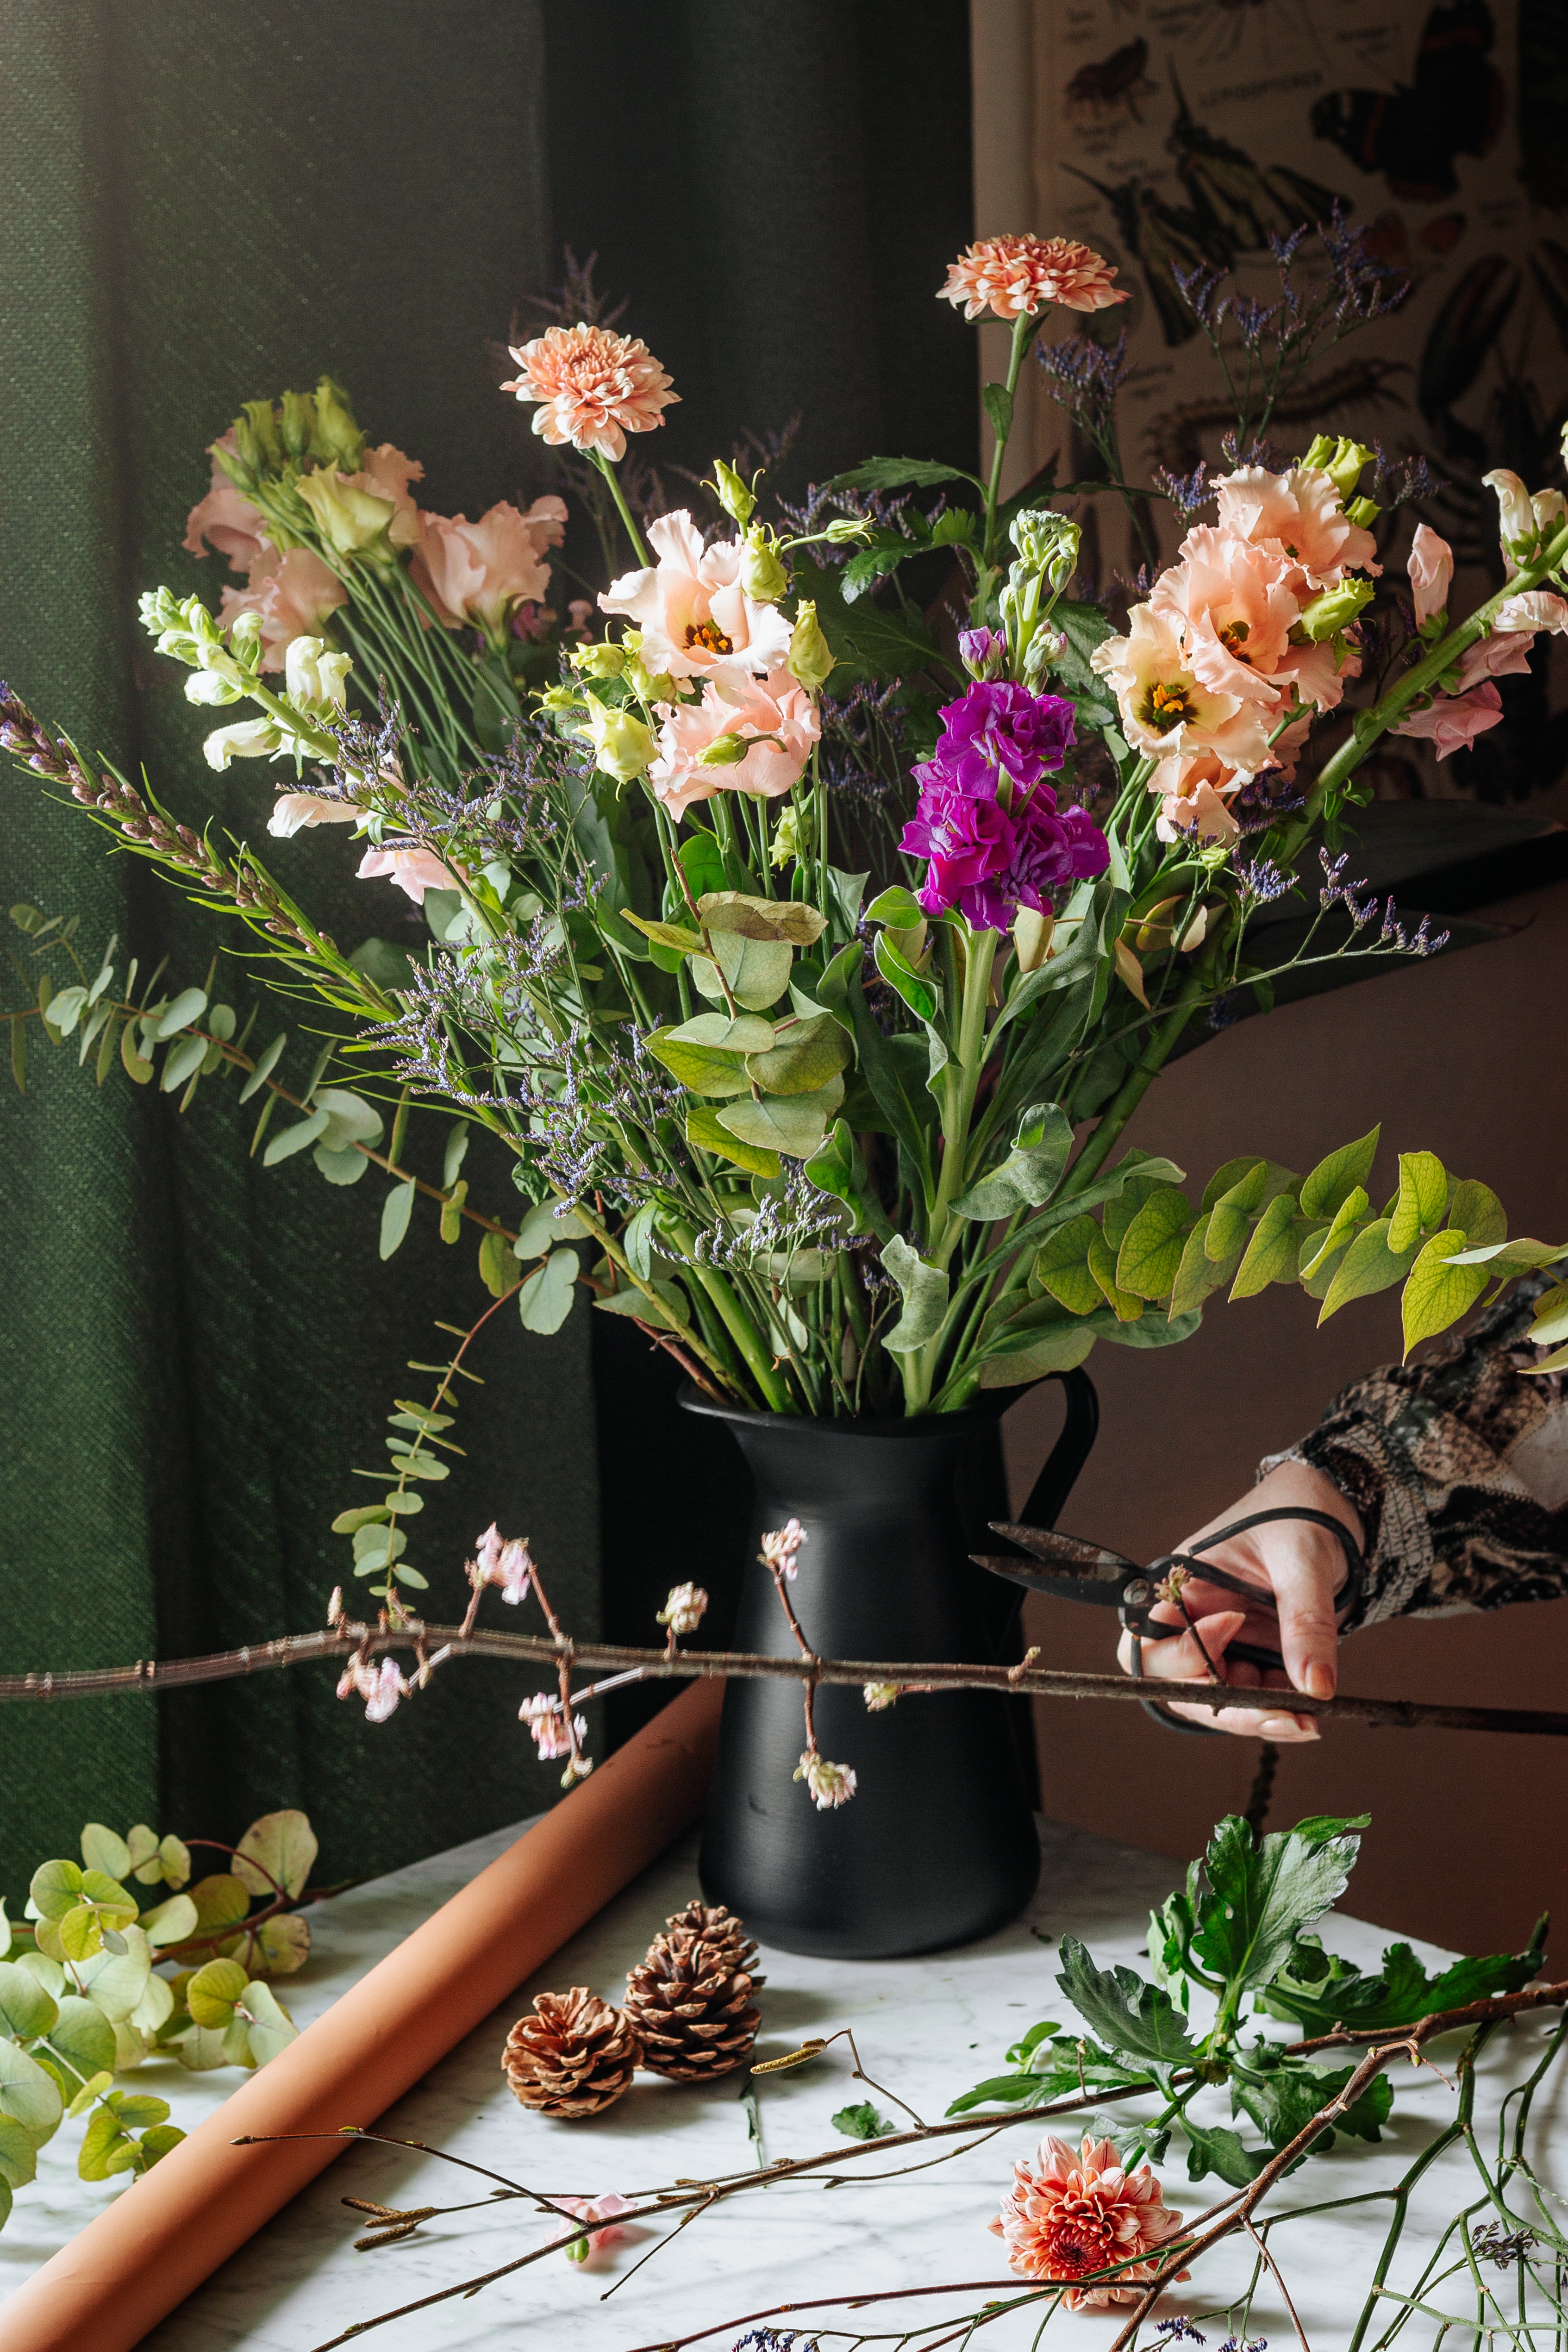 5 Ways To Brighten Up Your Home With Flowers